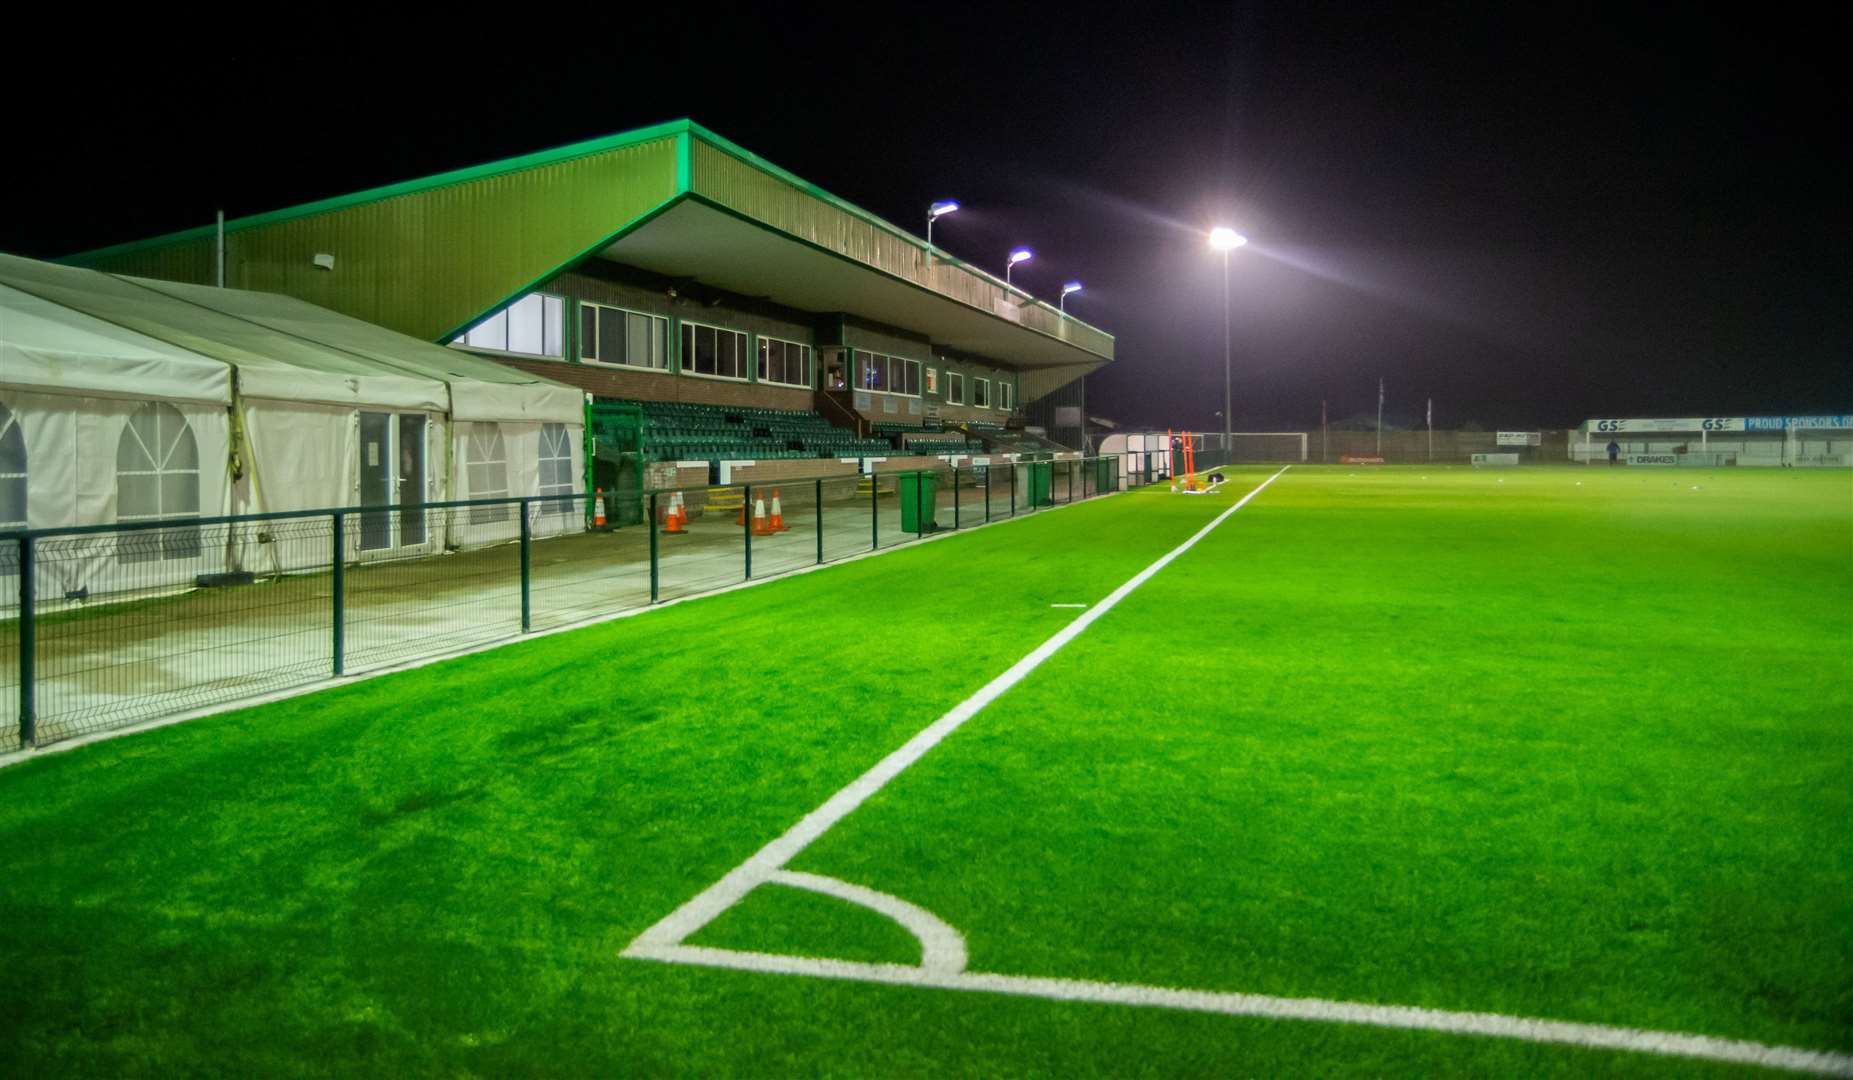 The new 3G pitch at Ashford United's Homelands ground. Picture: Ian Scammell